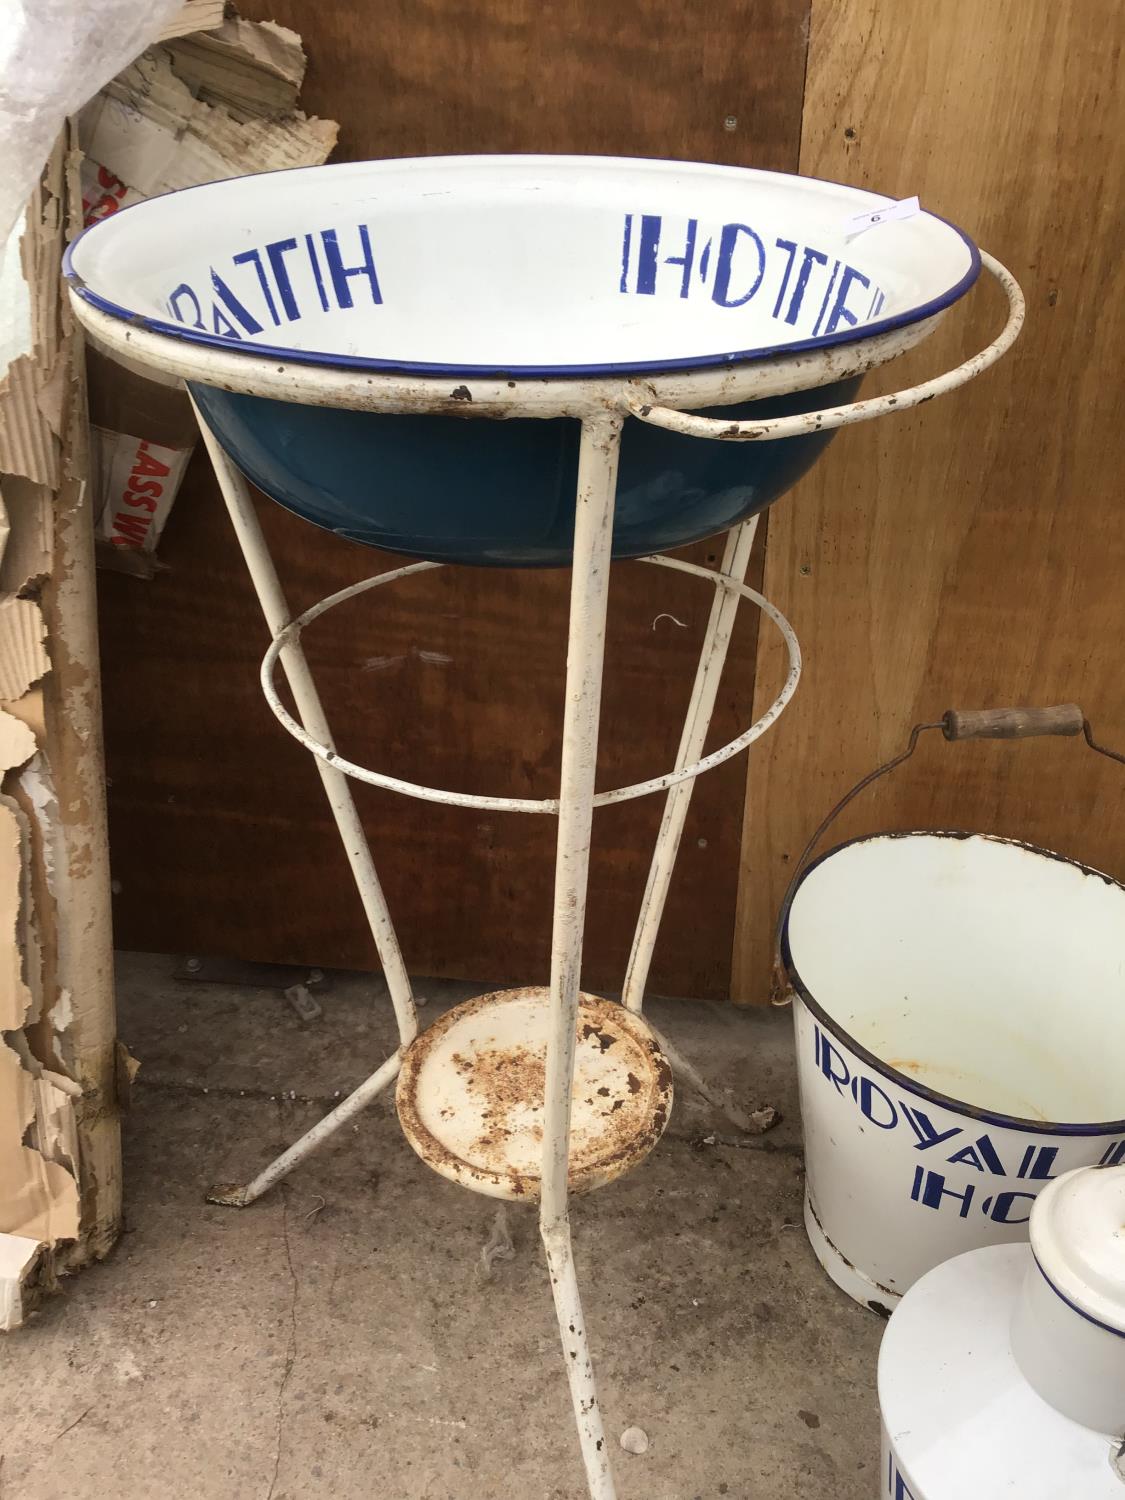 A VINTAGE 'ROYAL BATH HOTEL' WHITE AND BLUE ENAMEL BUCKET, LIDDED JUG, BOWL ON A STAND - Image 4 of 4